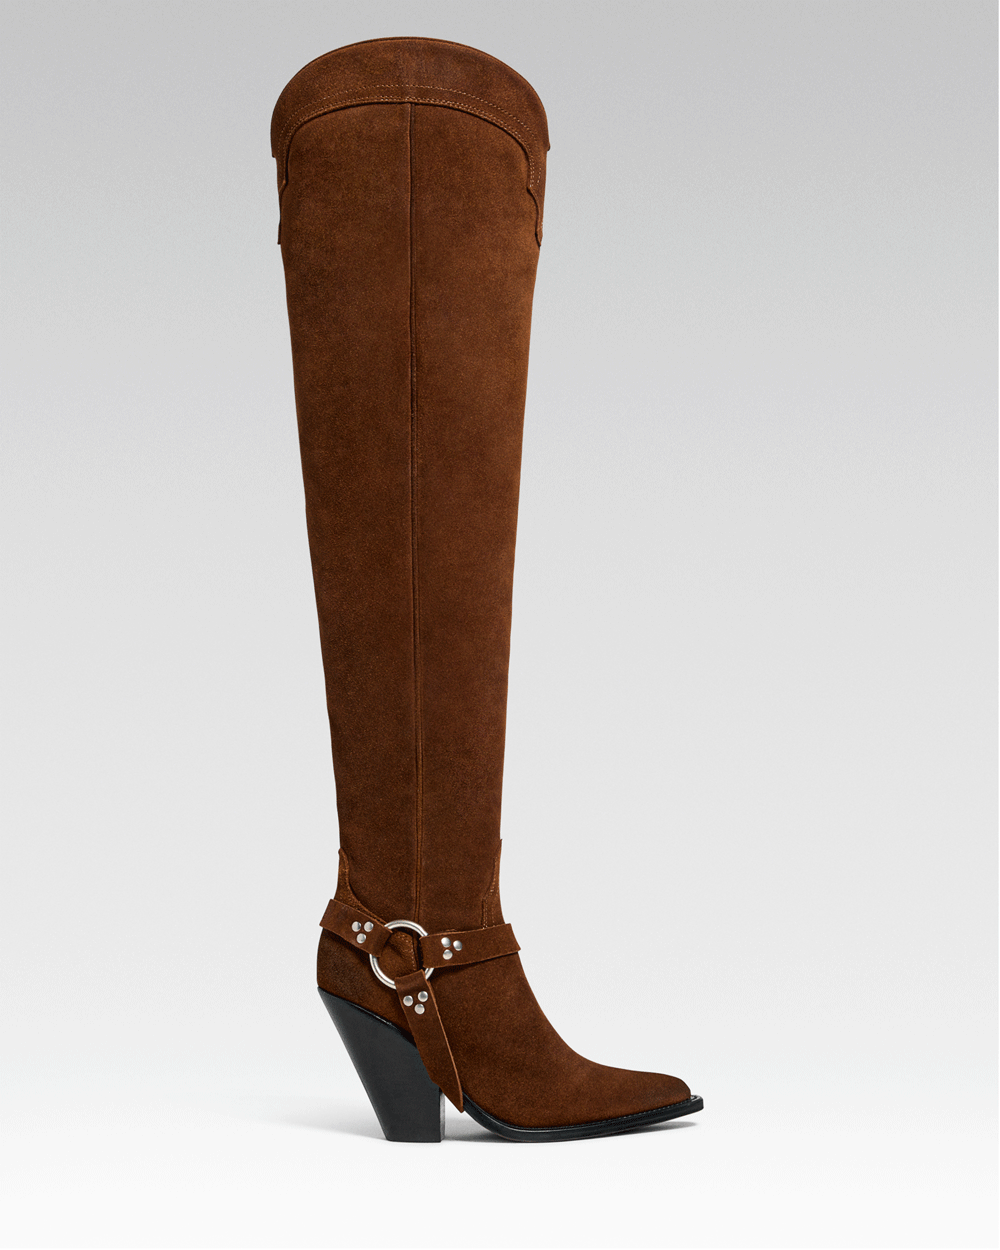 REYNOSA BELT Women's Over The Knee Boots in Rusty Brown Suede Oil | Leather Harness